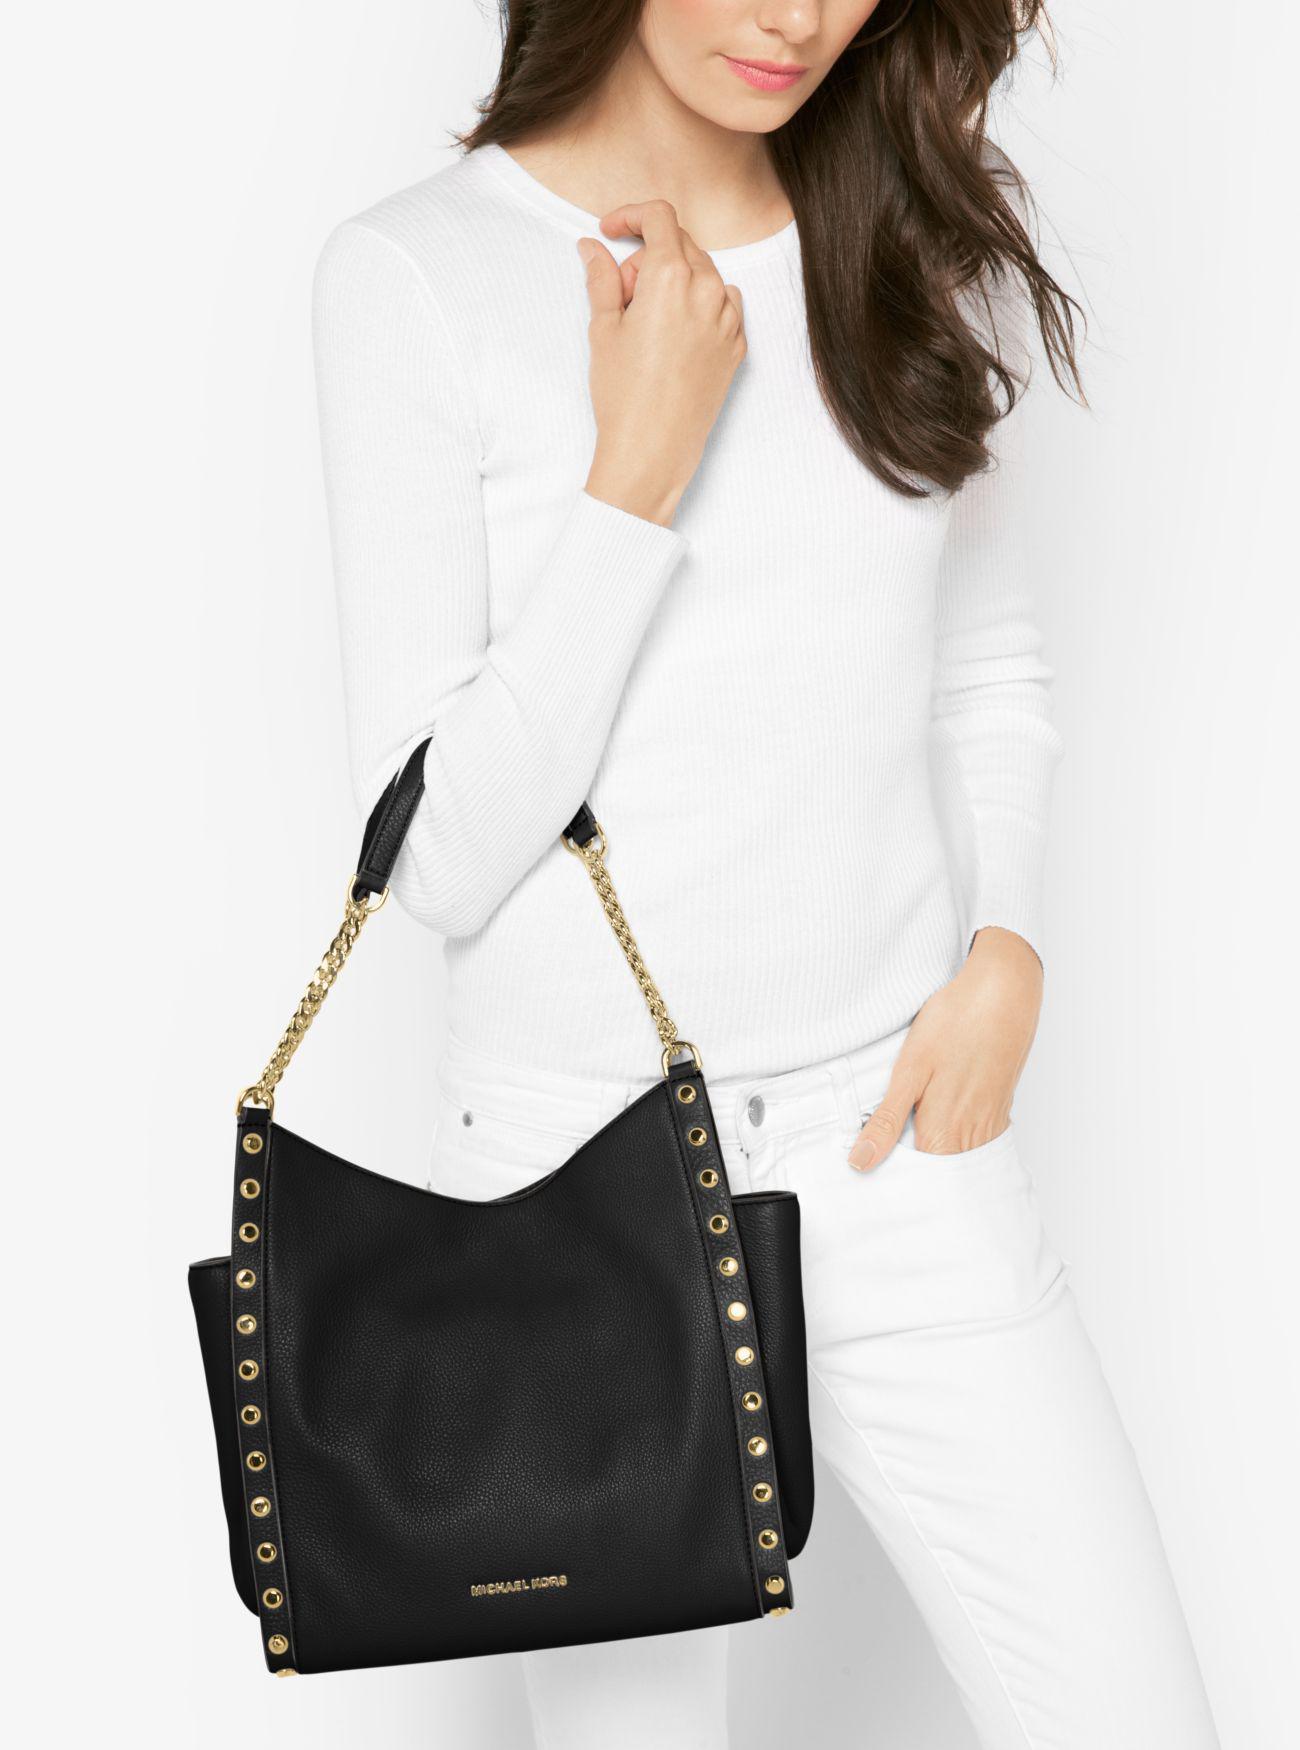 Lyst - Michael Kors Newbury Studded Leather Chain Tote Bag in Black